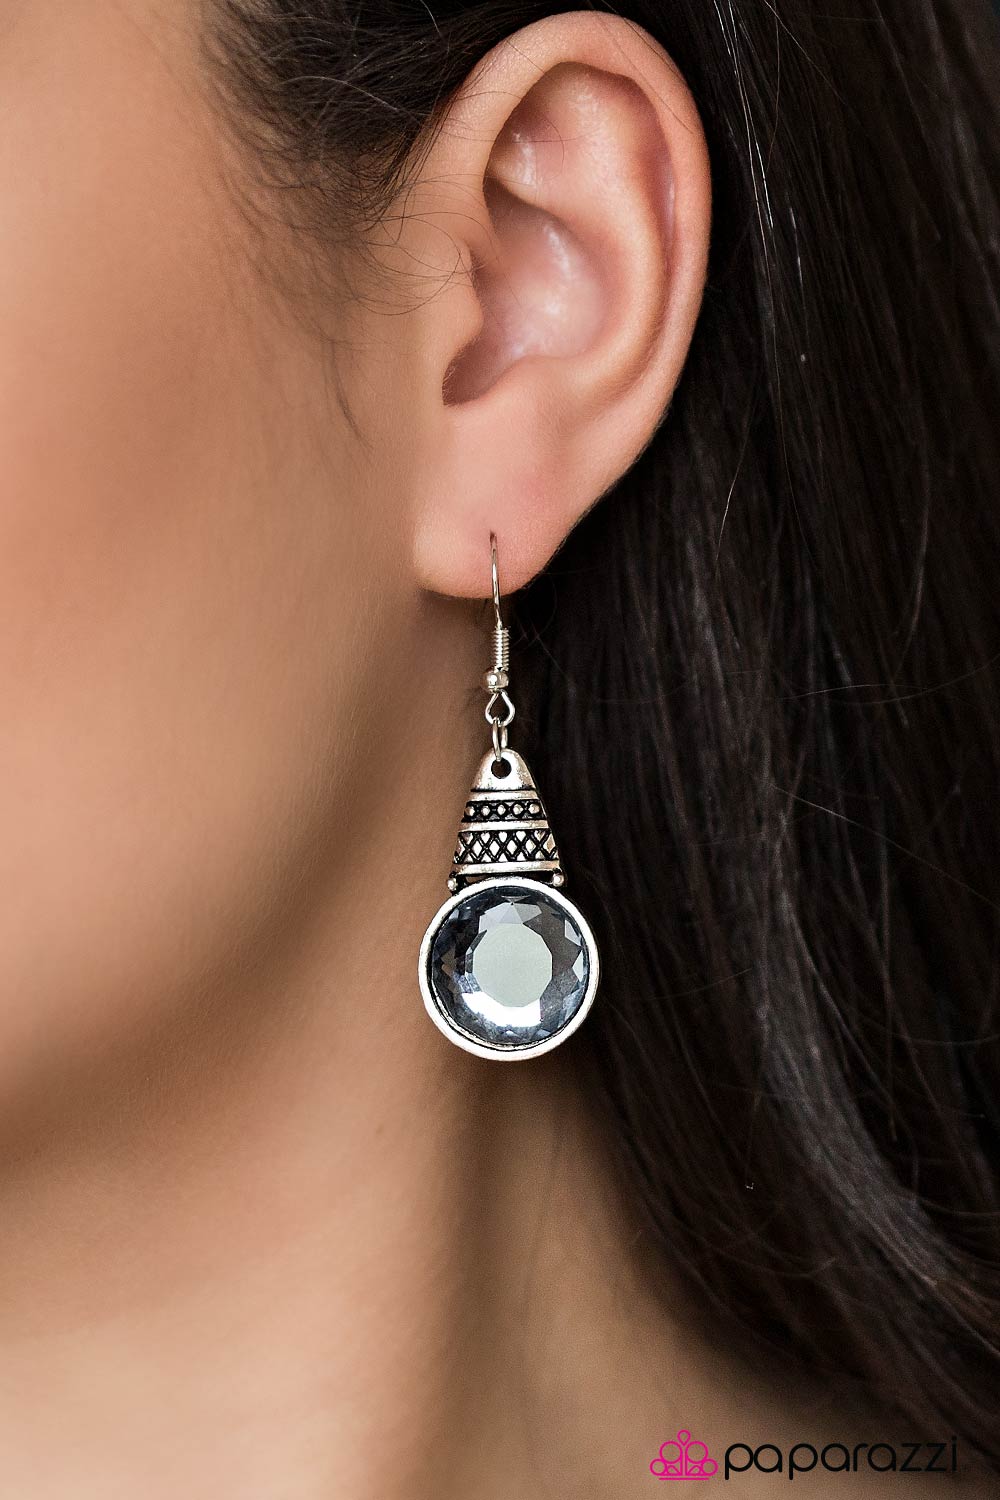 A Touch Of GLASS - Paparazzi earrings